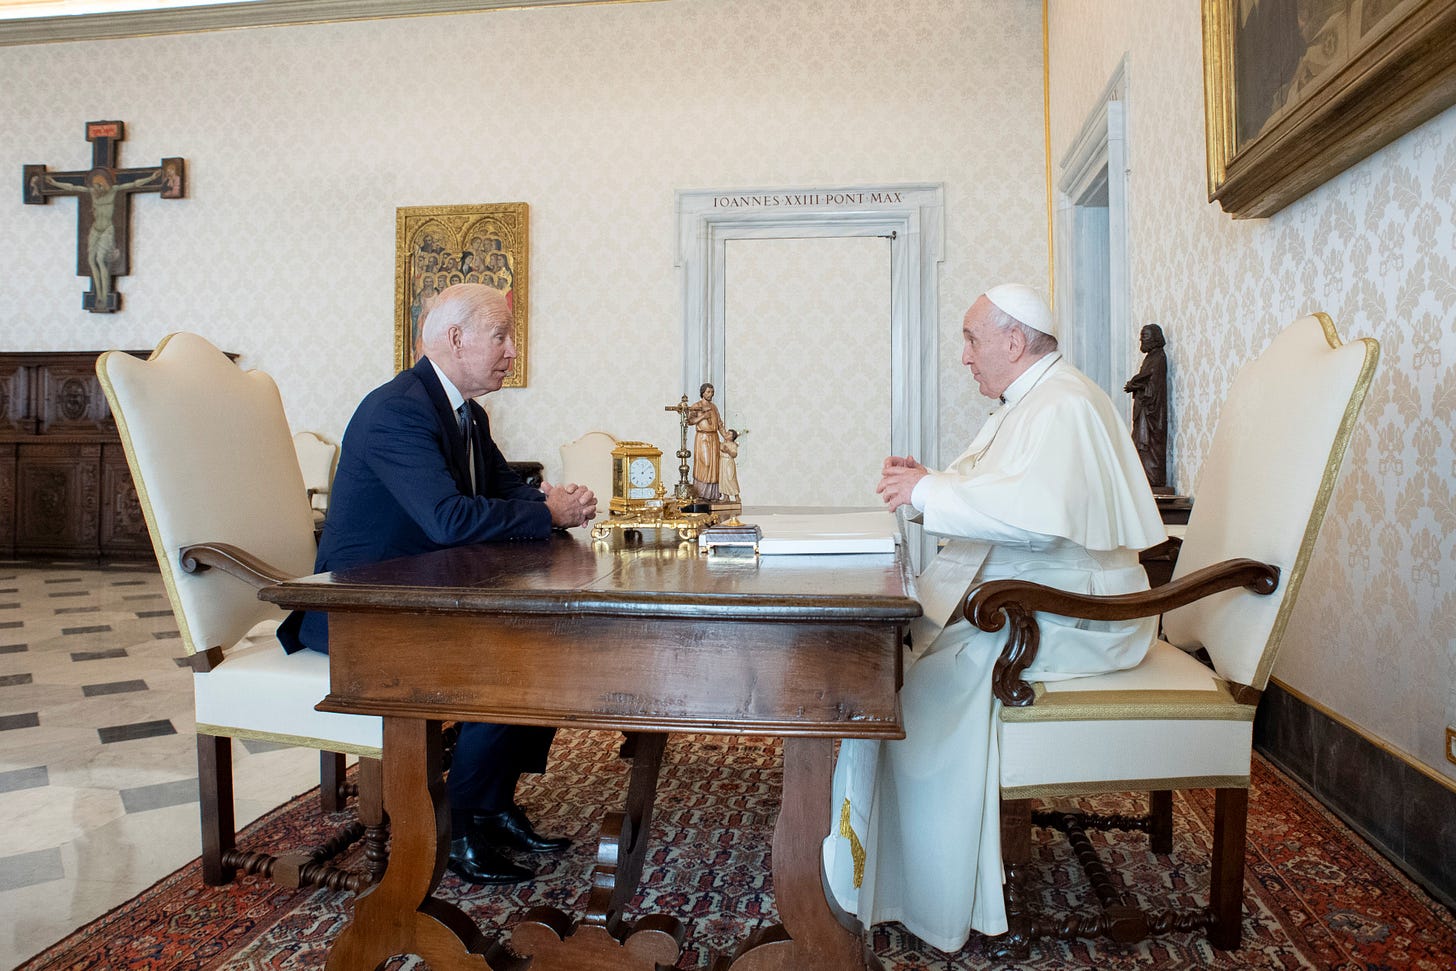 President Biden meets with Pope Francis